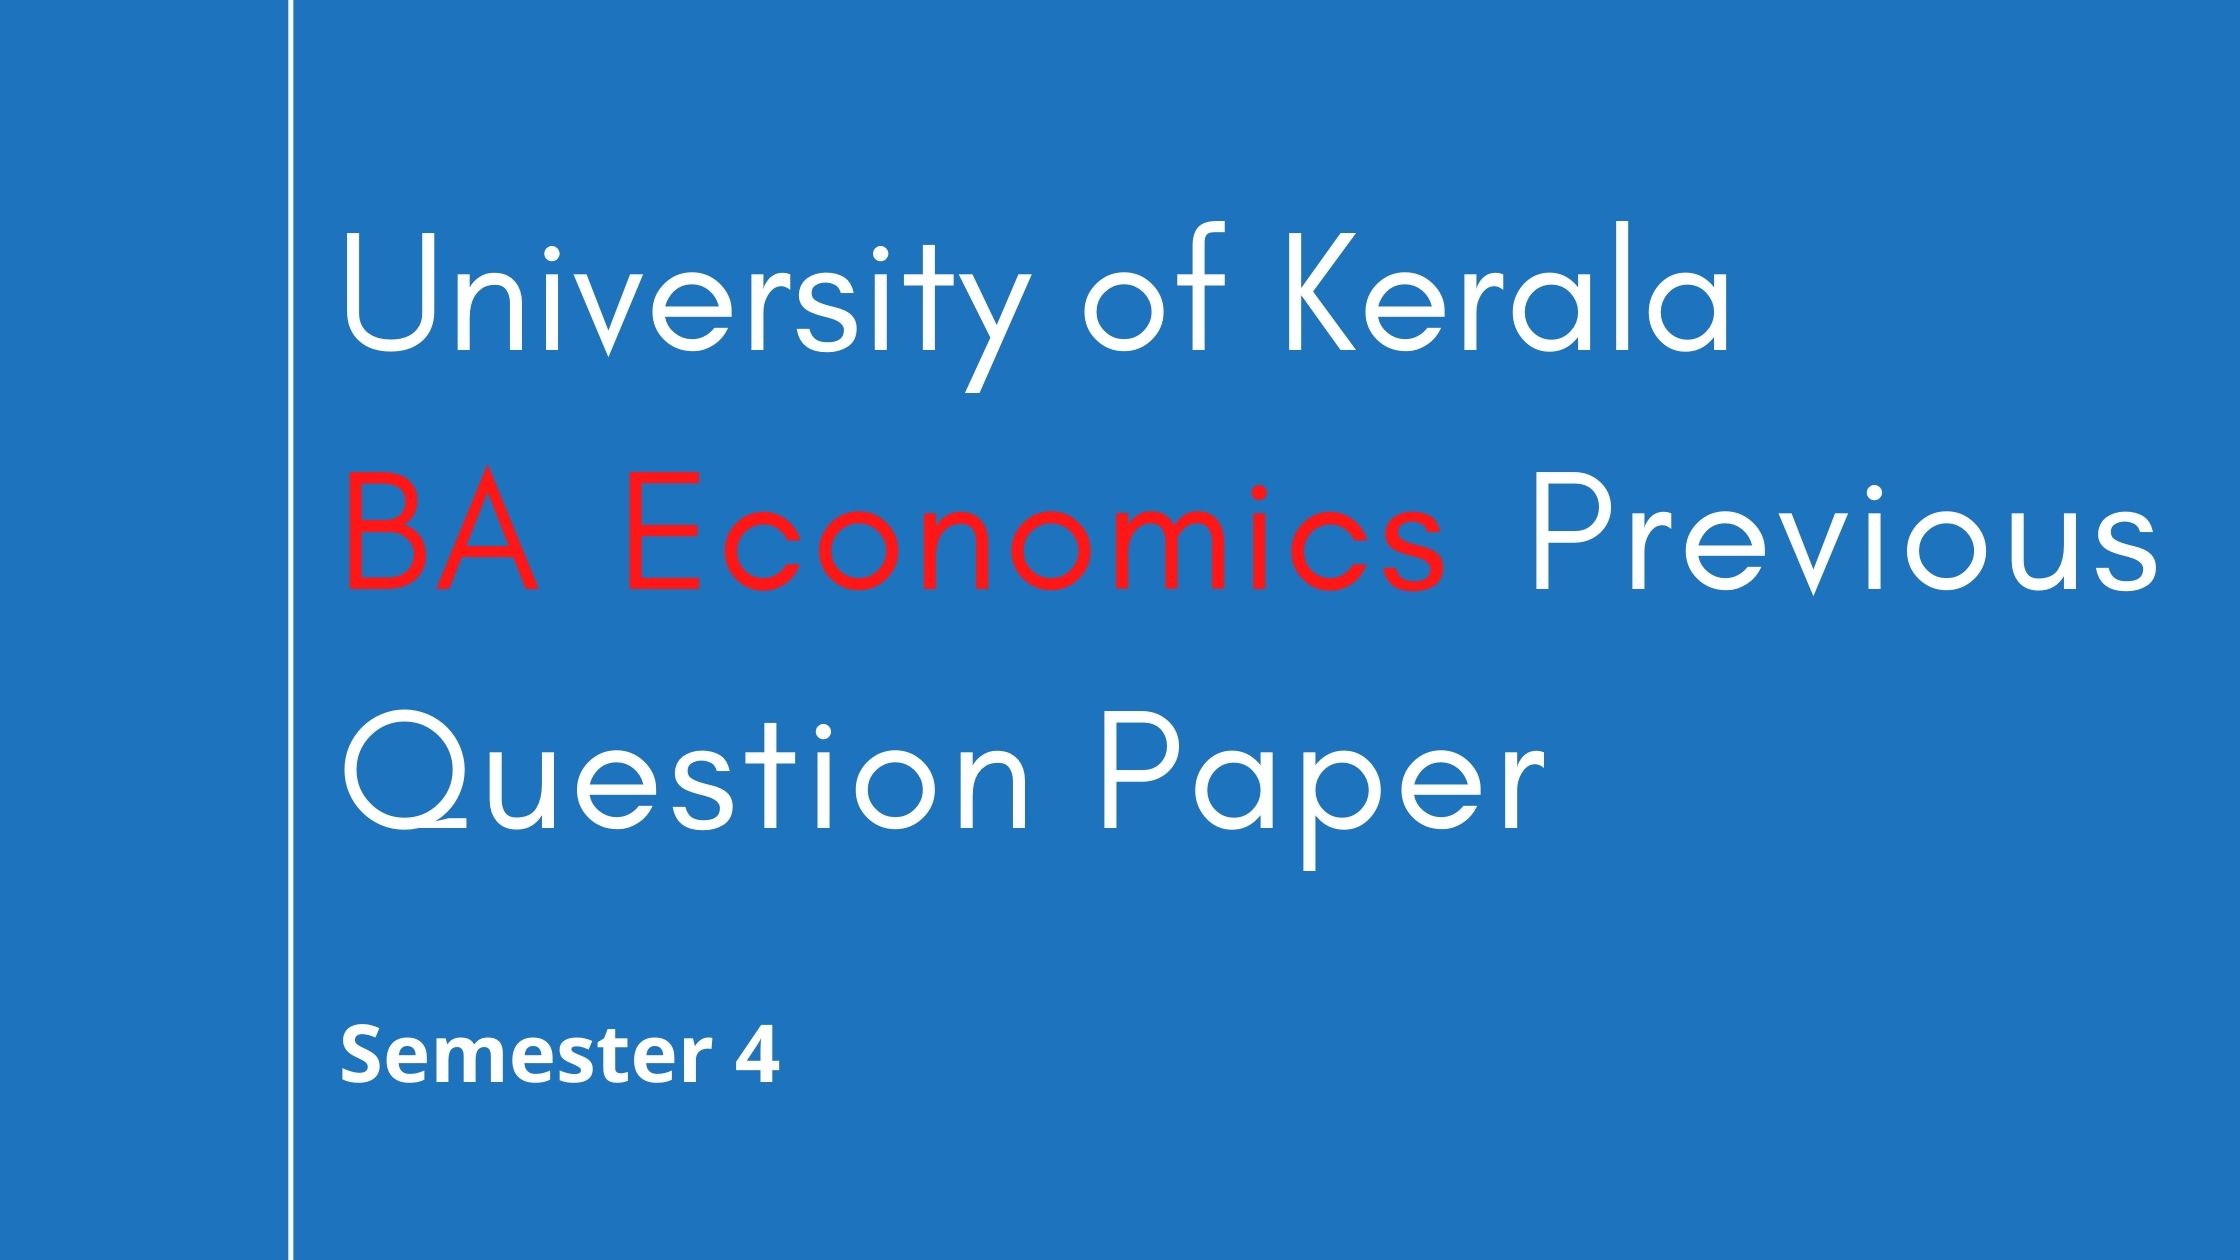 BA Economics Fourth Semester Previous Year Question Papers of Kerala University